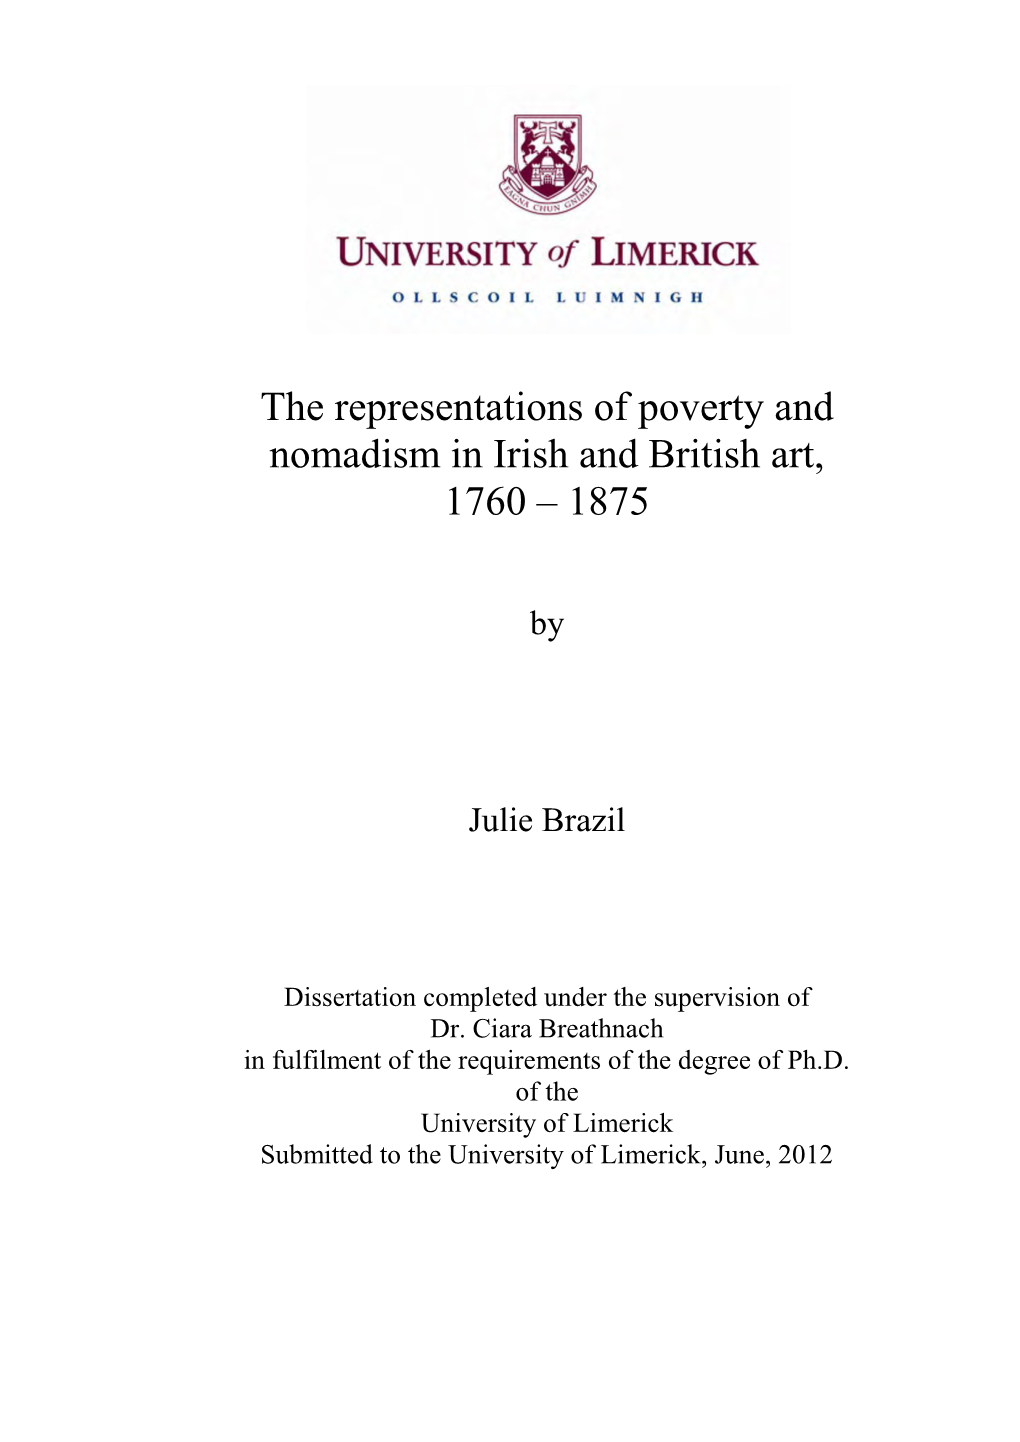 The Representations of Poverty and Nomadism in Irish and British Art, 1760 – 1875